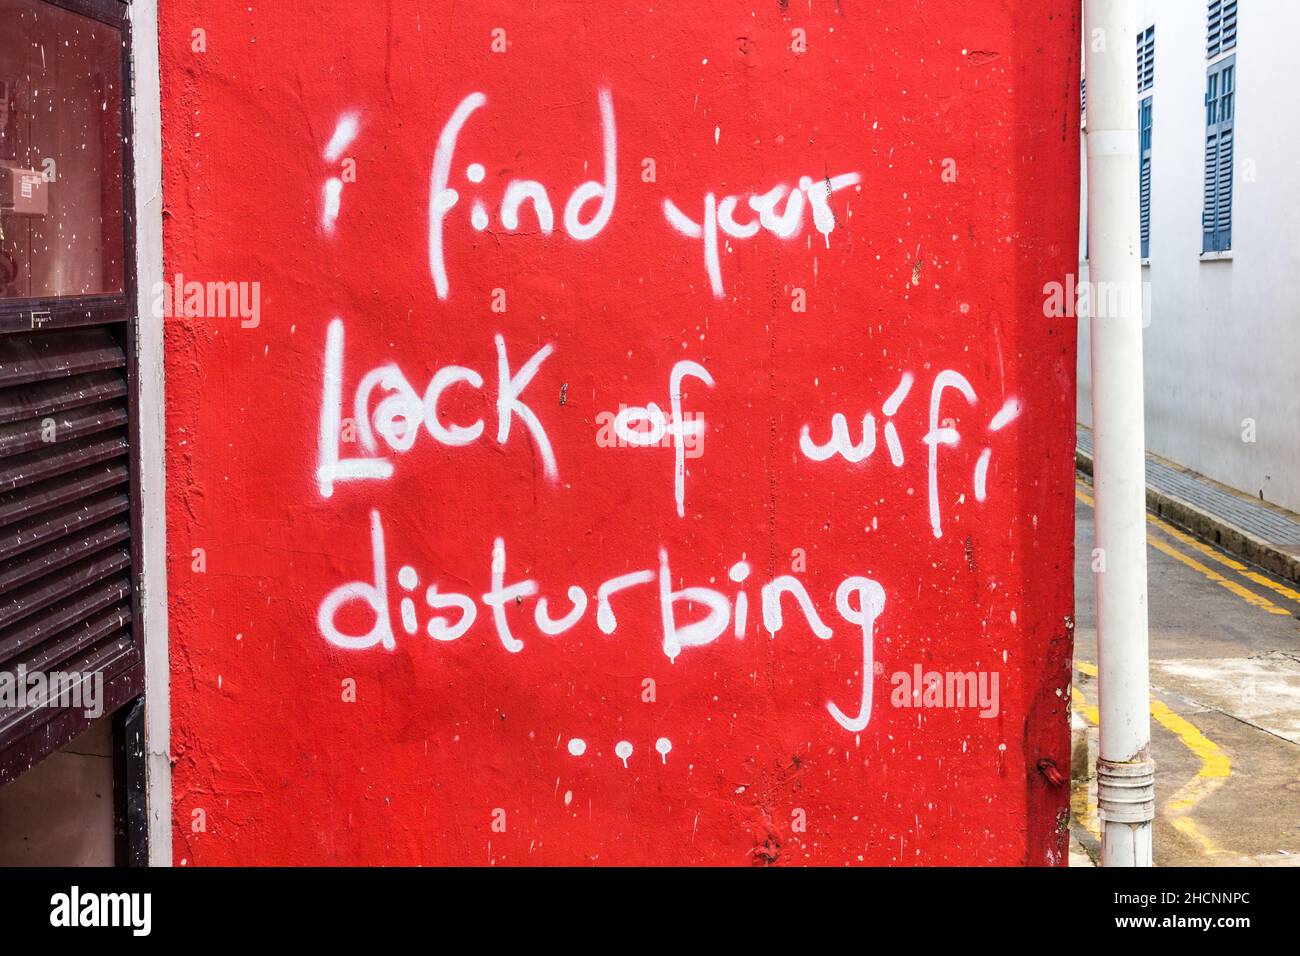 SINGAPORE, SINGAPORE - MARCH 10, 2018: Text I wind your lack of wifi disturbing written on a wall in Singapore. Stock Photo